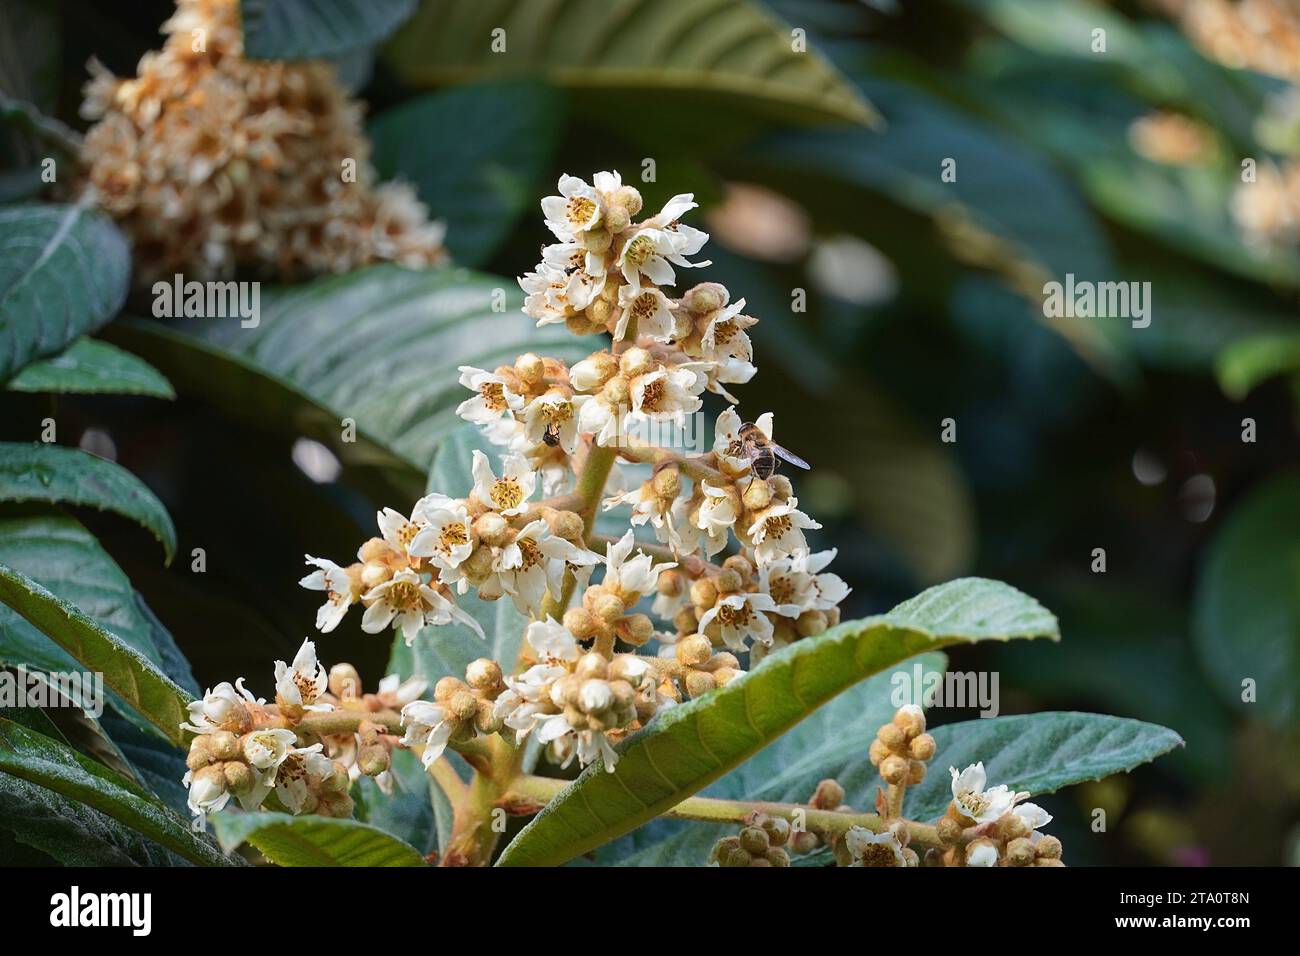 Loquat or eriobotrya japonica tree flowers, in autumn, and honey bees, or apis mellifera, in Glyfada, Greece Stock Photo